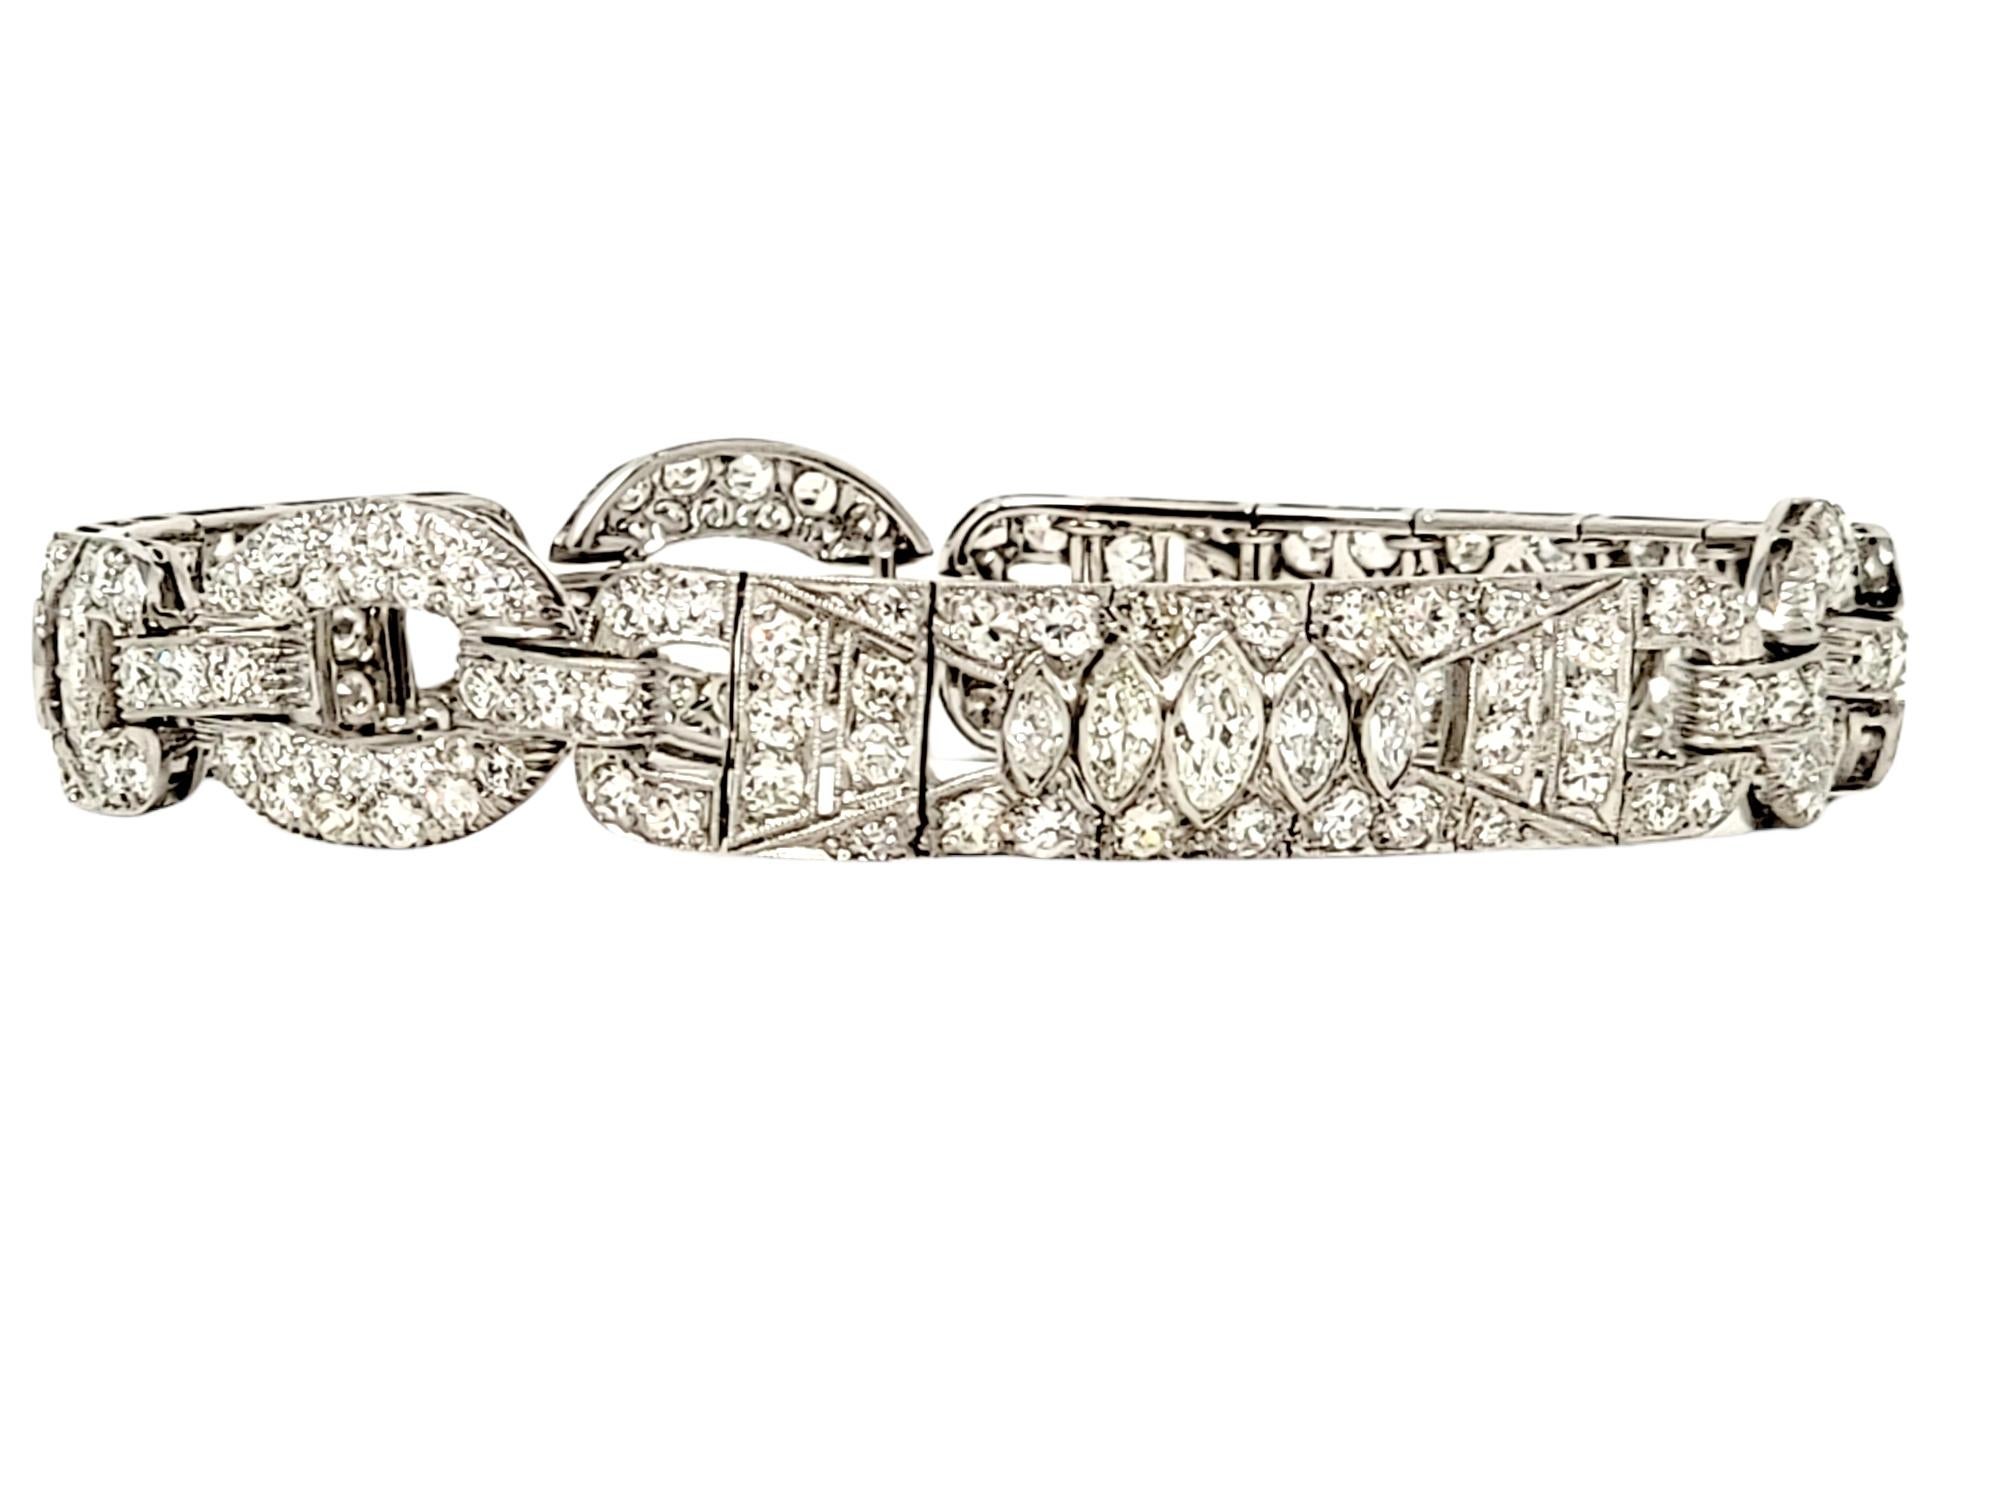 Art Deco 7.43 Carat Round and Marquis Natural Diamond Ornate Link Bracelet in Platinum For Sale